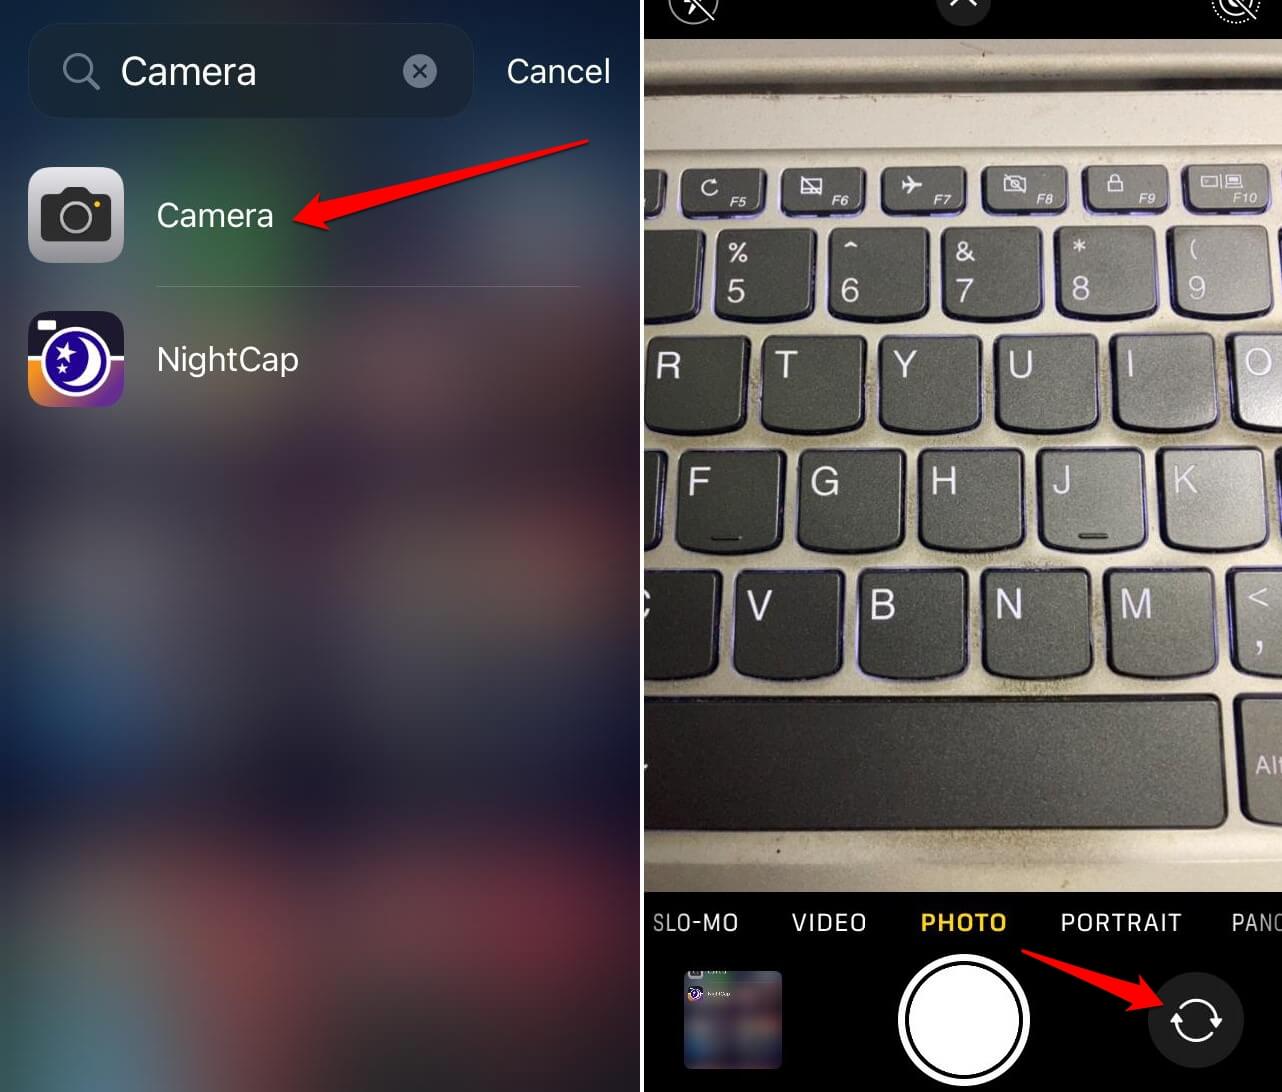 switch-between-iOS-camera-modes